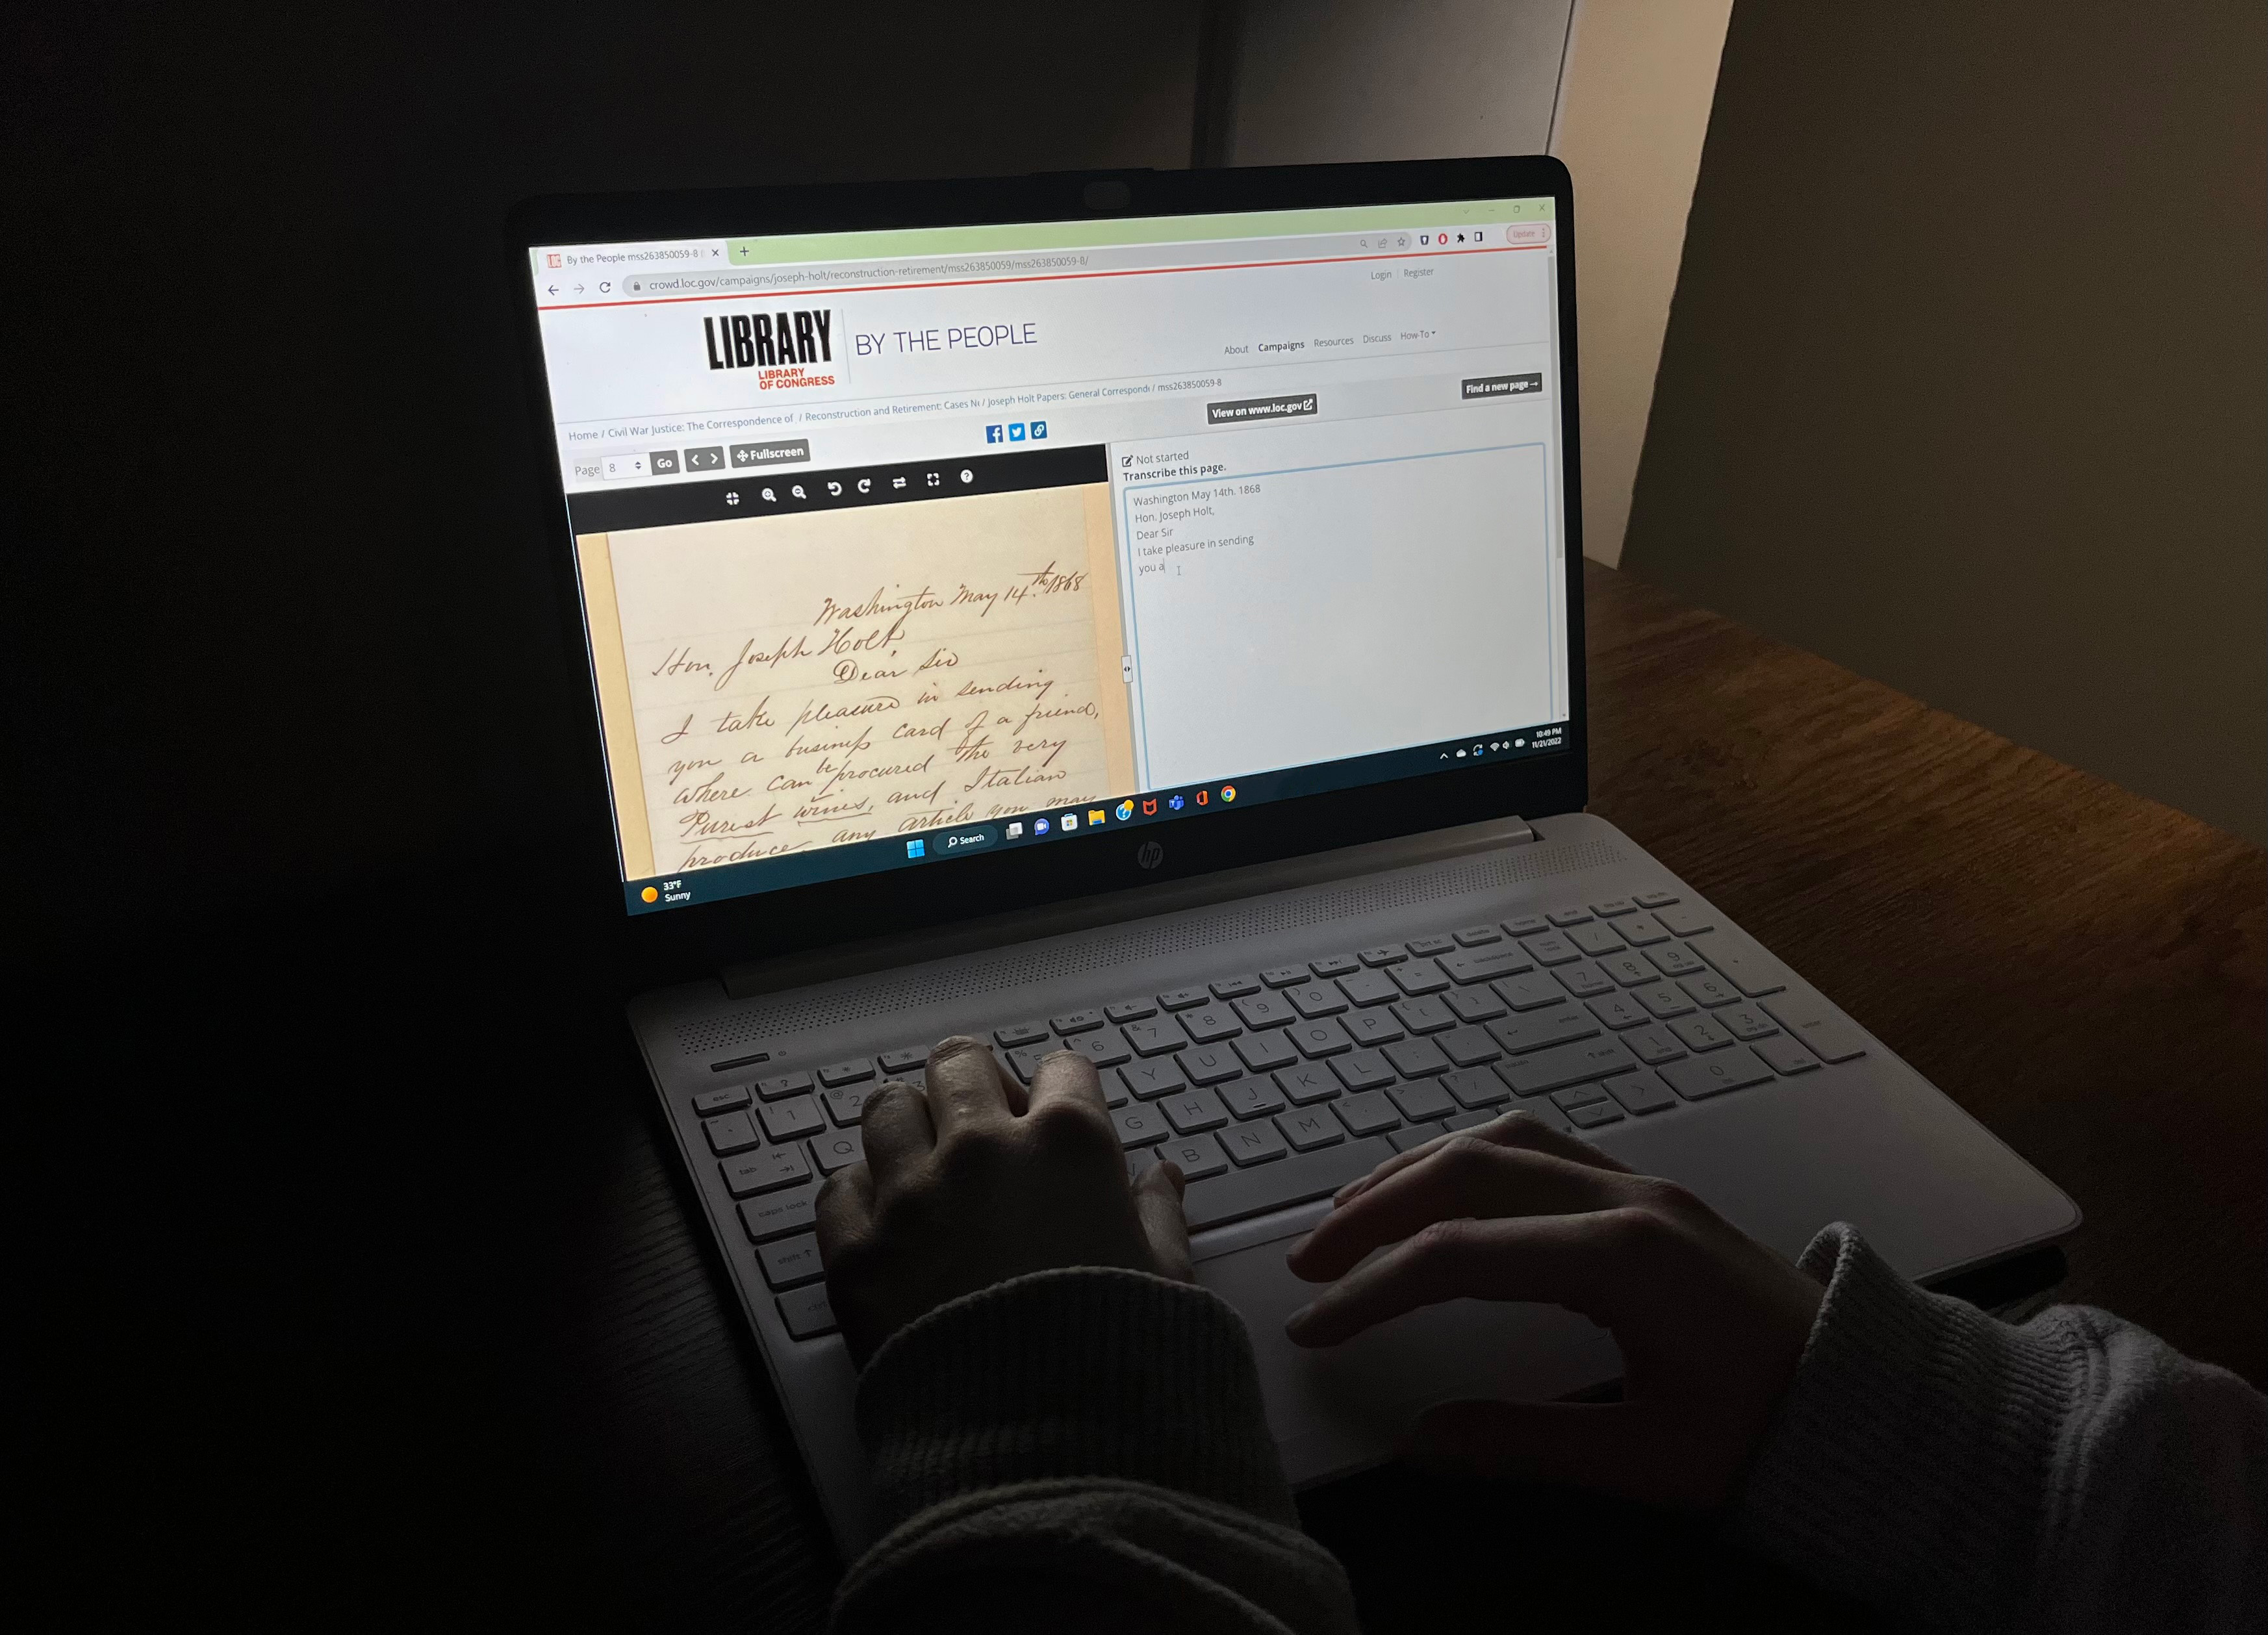 In a dark room, hands type on the keyboard of a laptop displaying a webpage with the text “Library of Congress” “By the People.” The webpage has a historic document next to a transcription box with text in it.